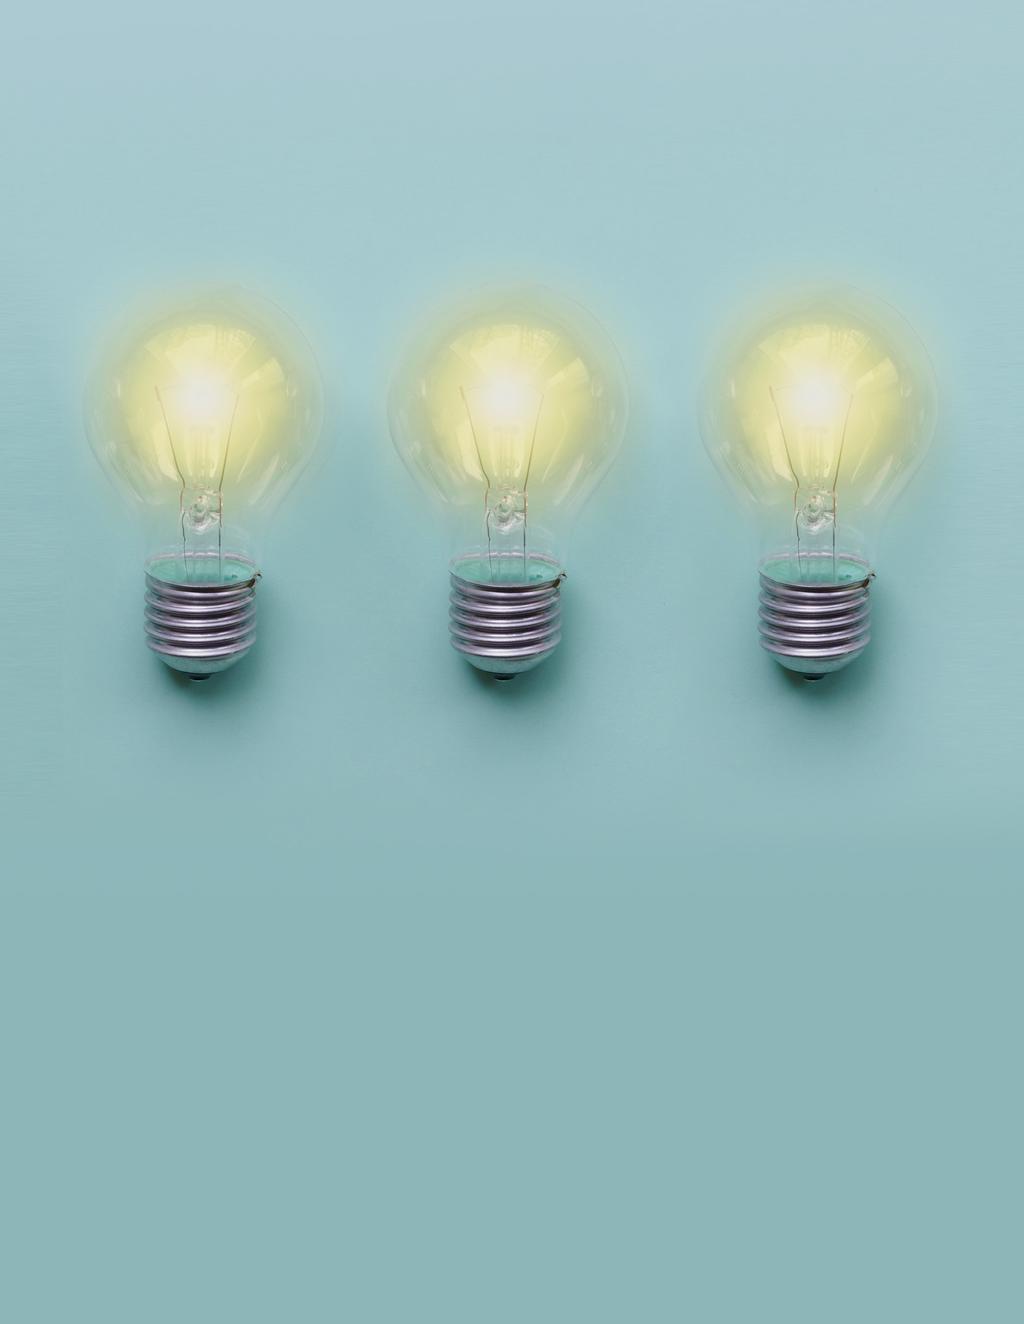 3 Bright Ideas for Increasing